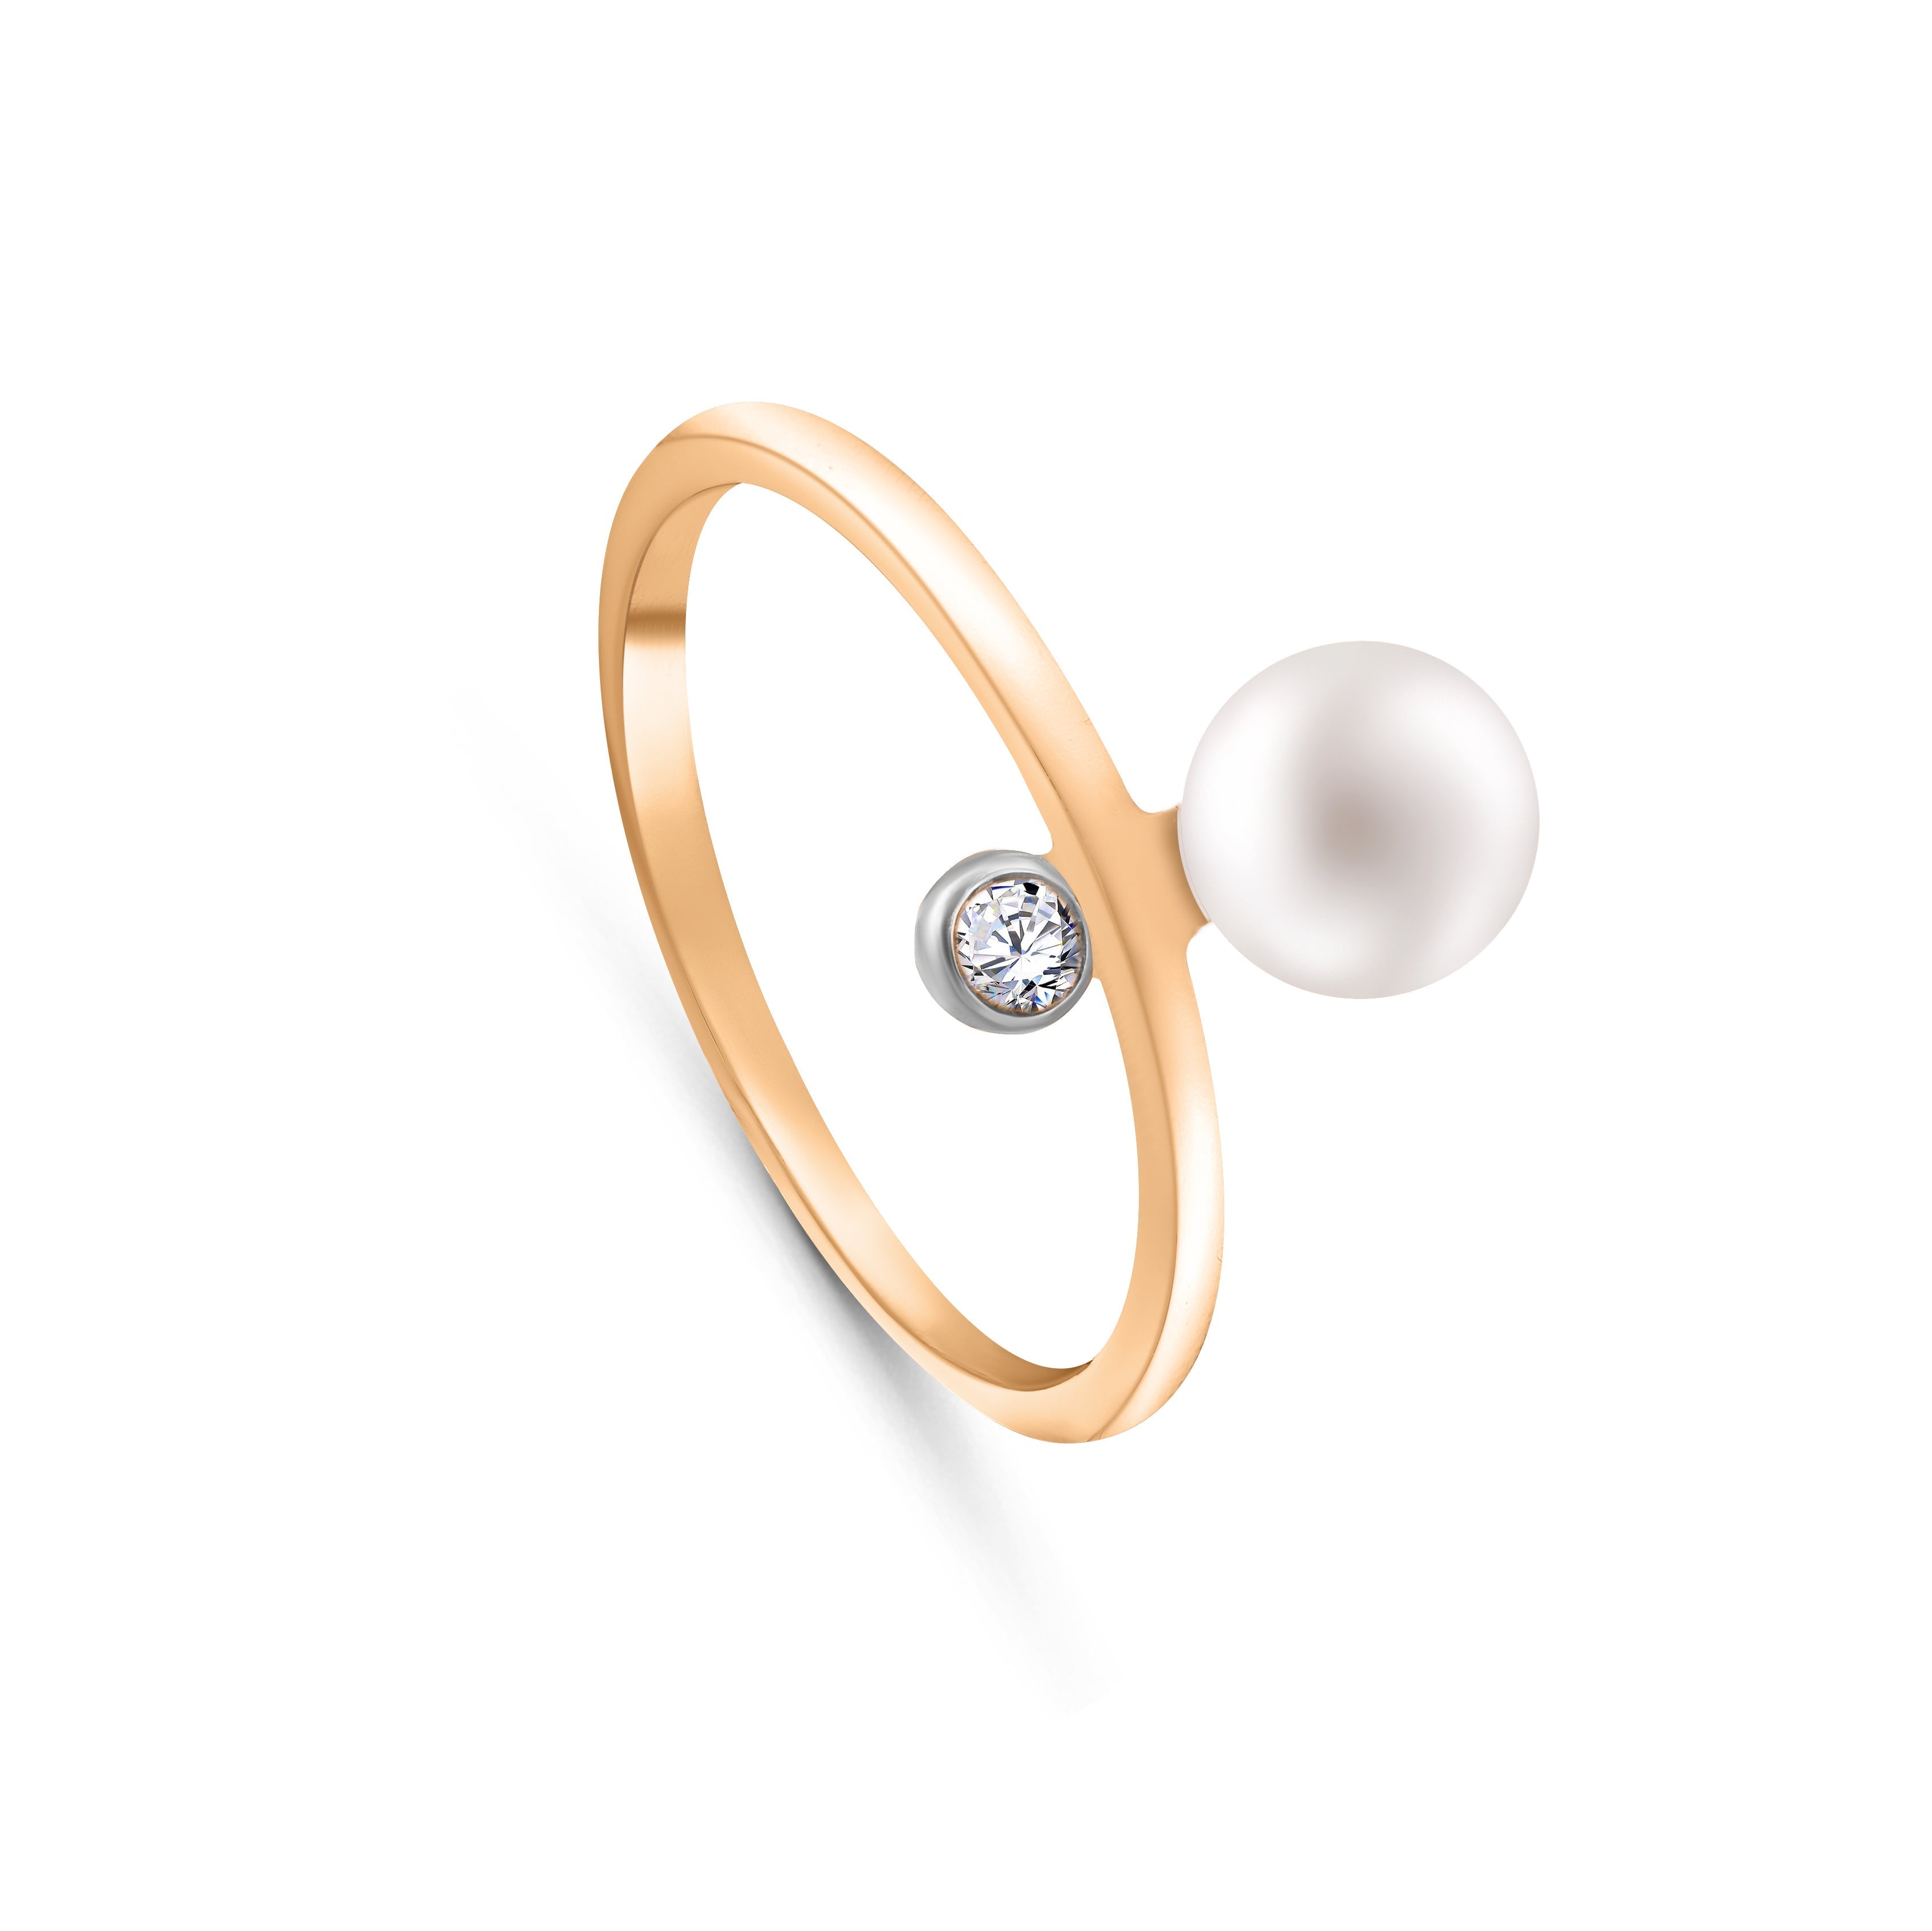 A beautiful ring with 1 round brilliant diamond and 1 pearl on center in 18K Yellow Gold - S-X20R